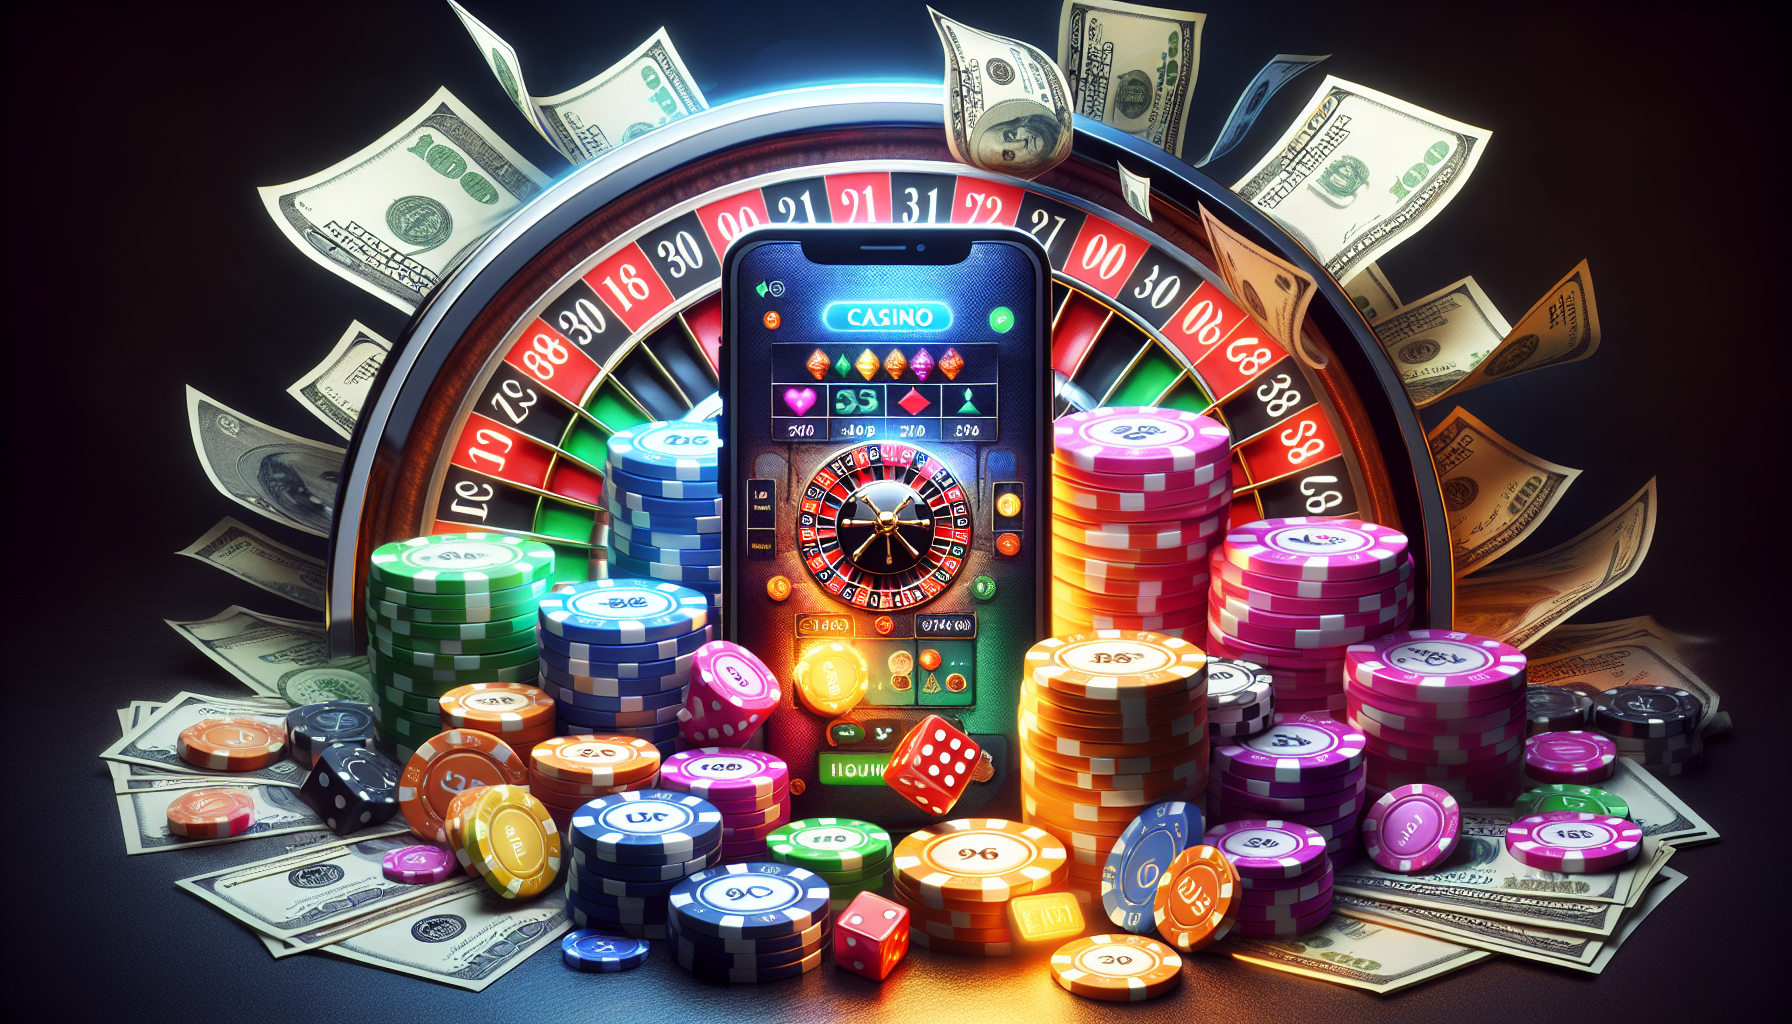 Are There Any Casino Apps That You Can Win Real Money?